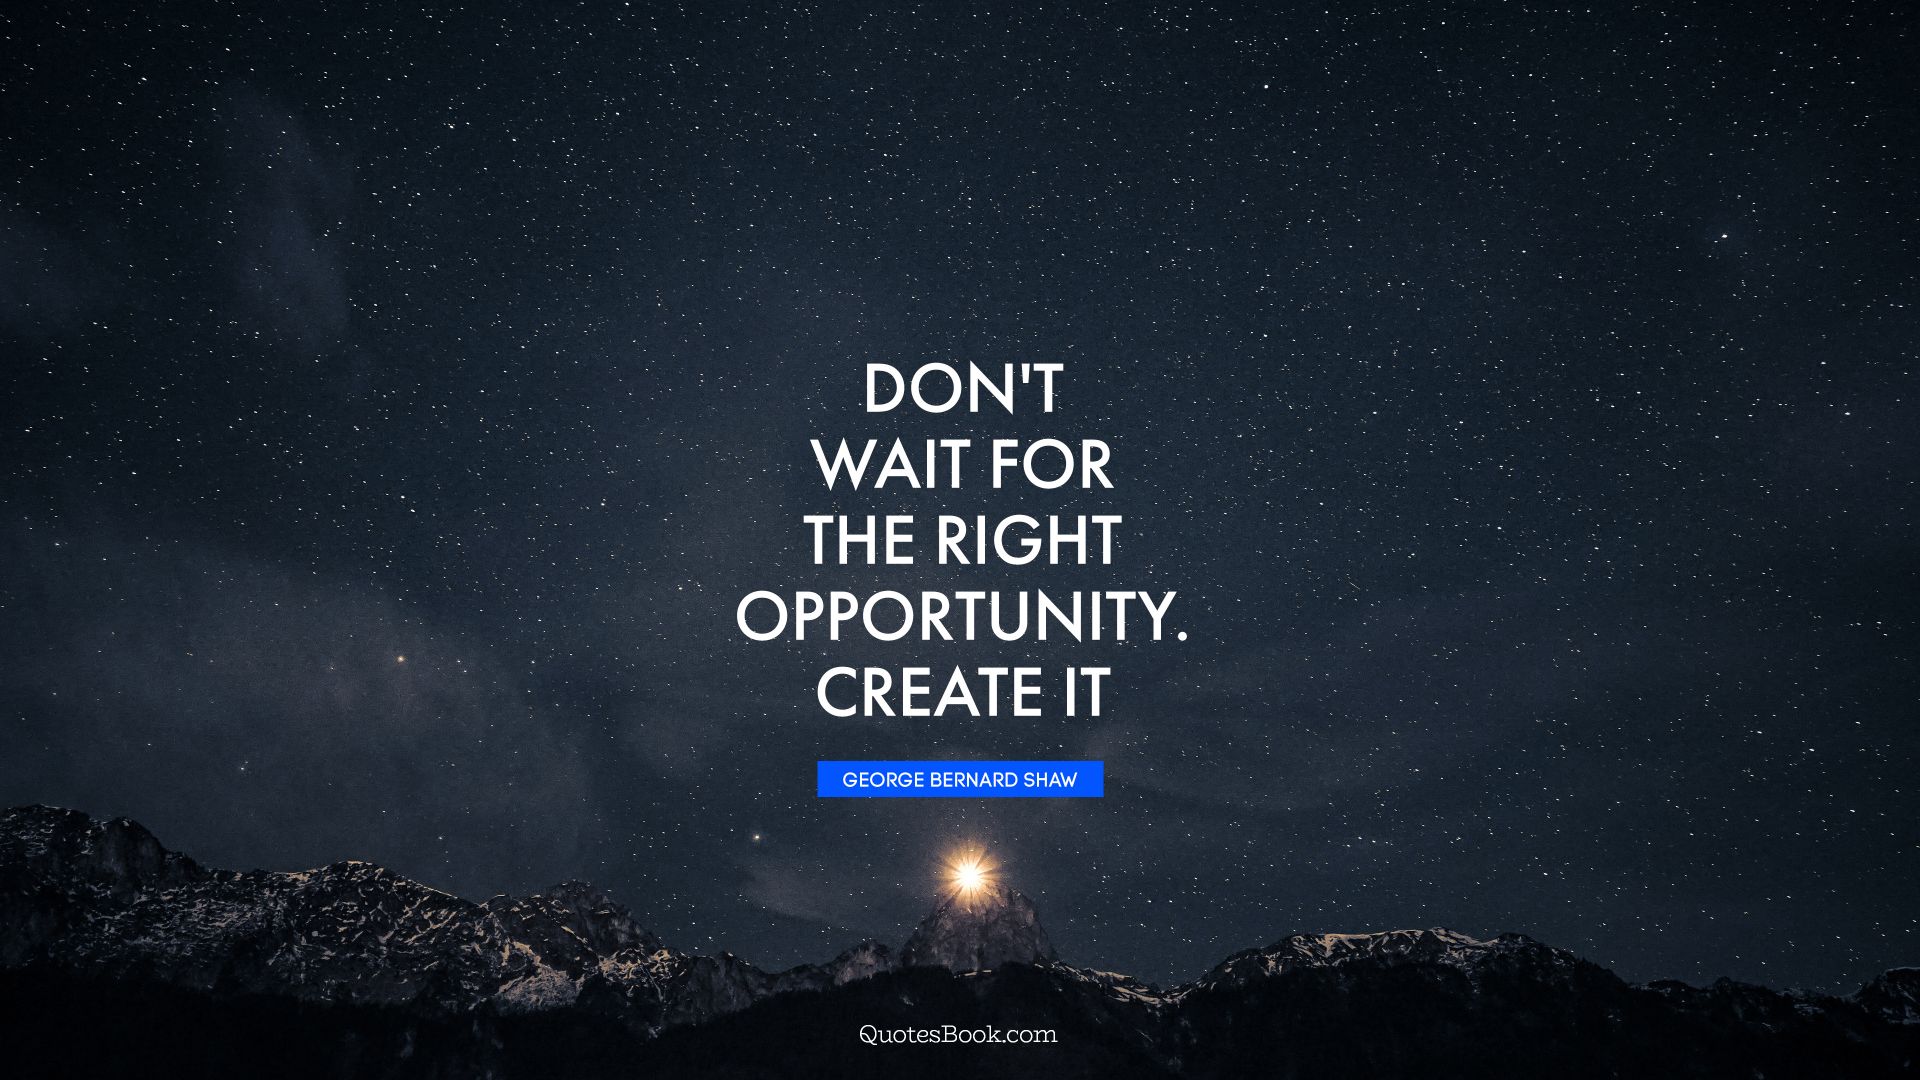 Don't wait for the right opportunity. Create it. - Quote by George Bernard Shaw